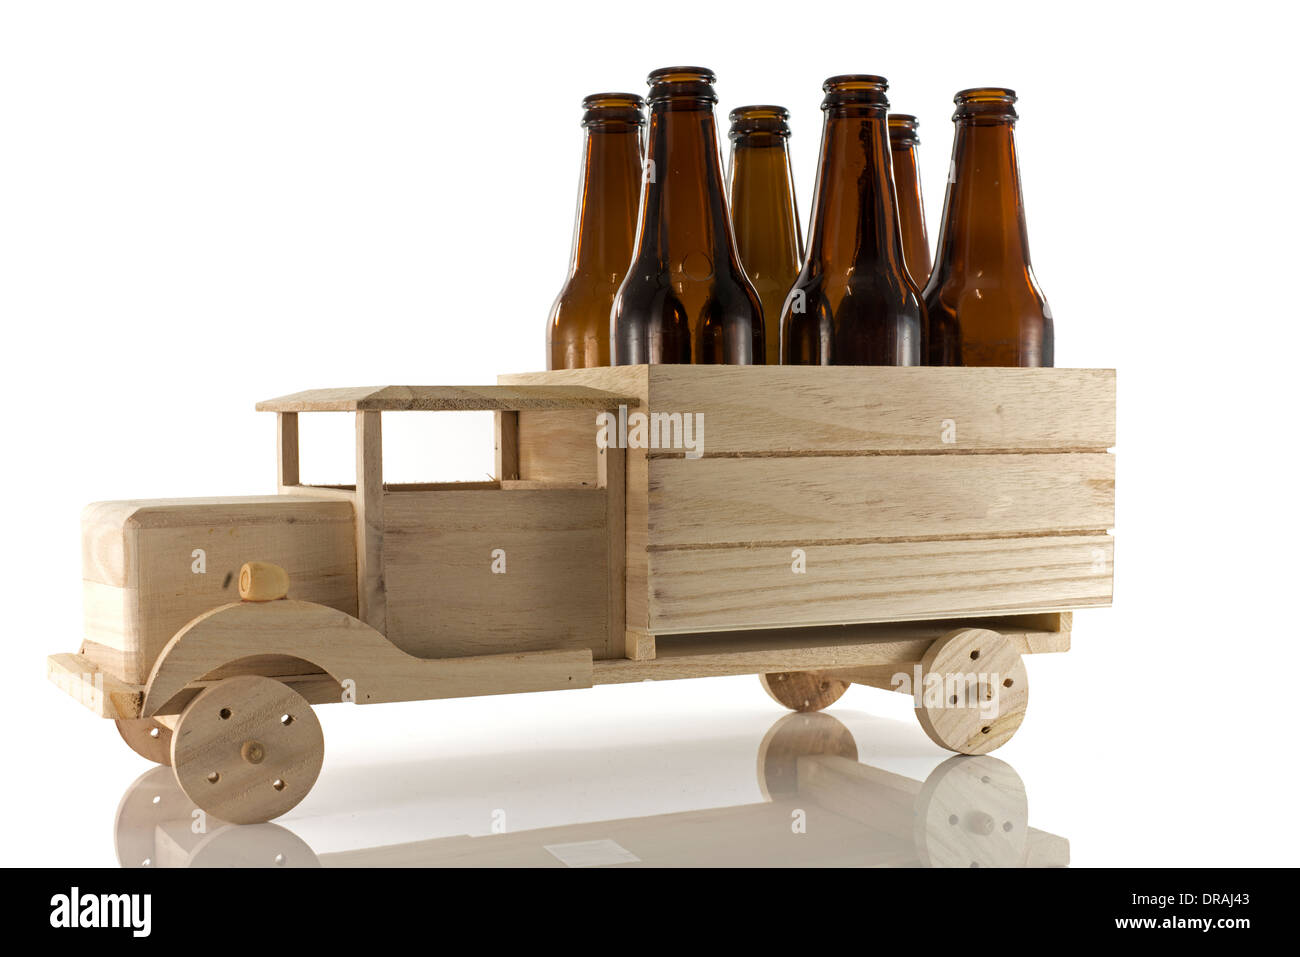 wooden car with beer bottles isoalted on white Stock Photo